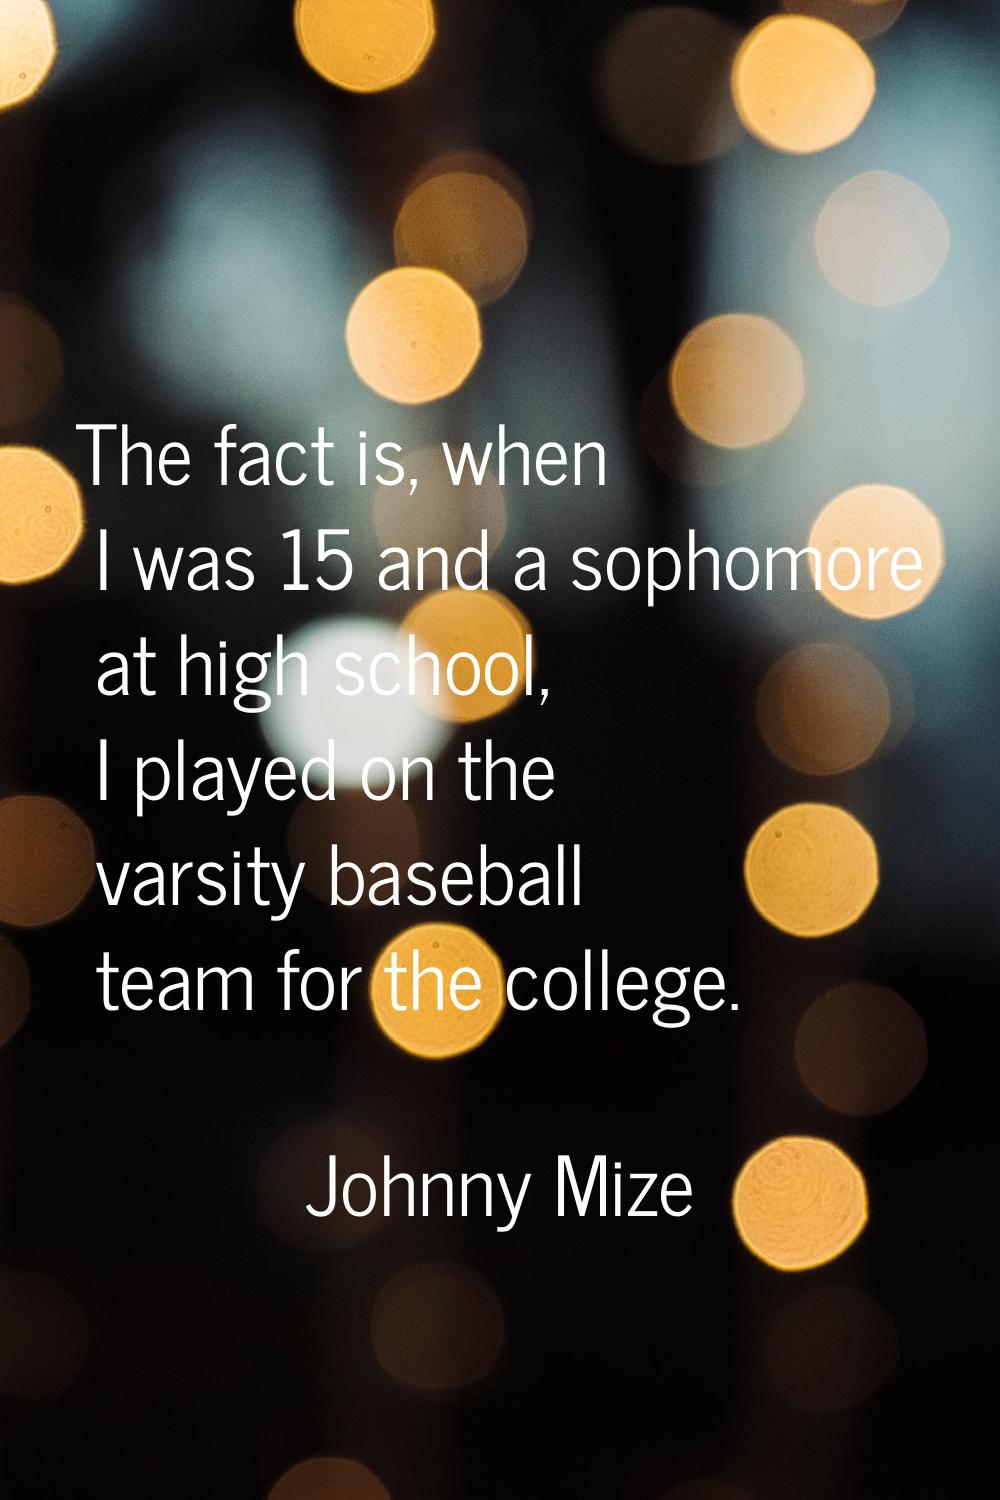 The fact is, when I was 15 and a sophomore at high school, I played on the varsity baseball team fo